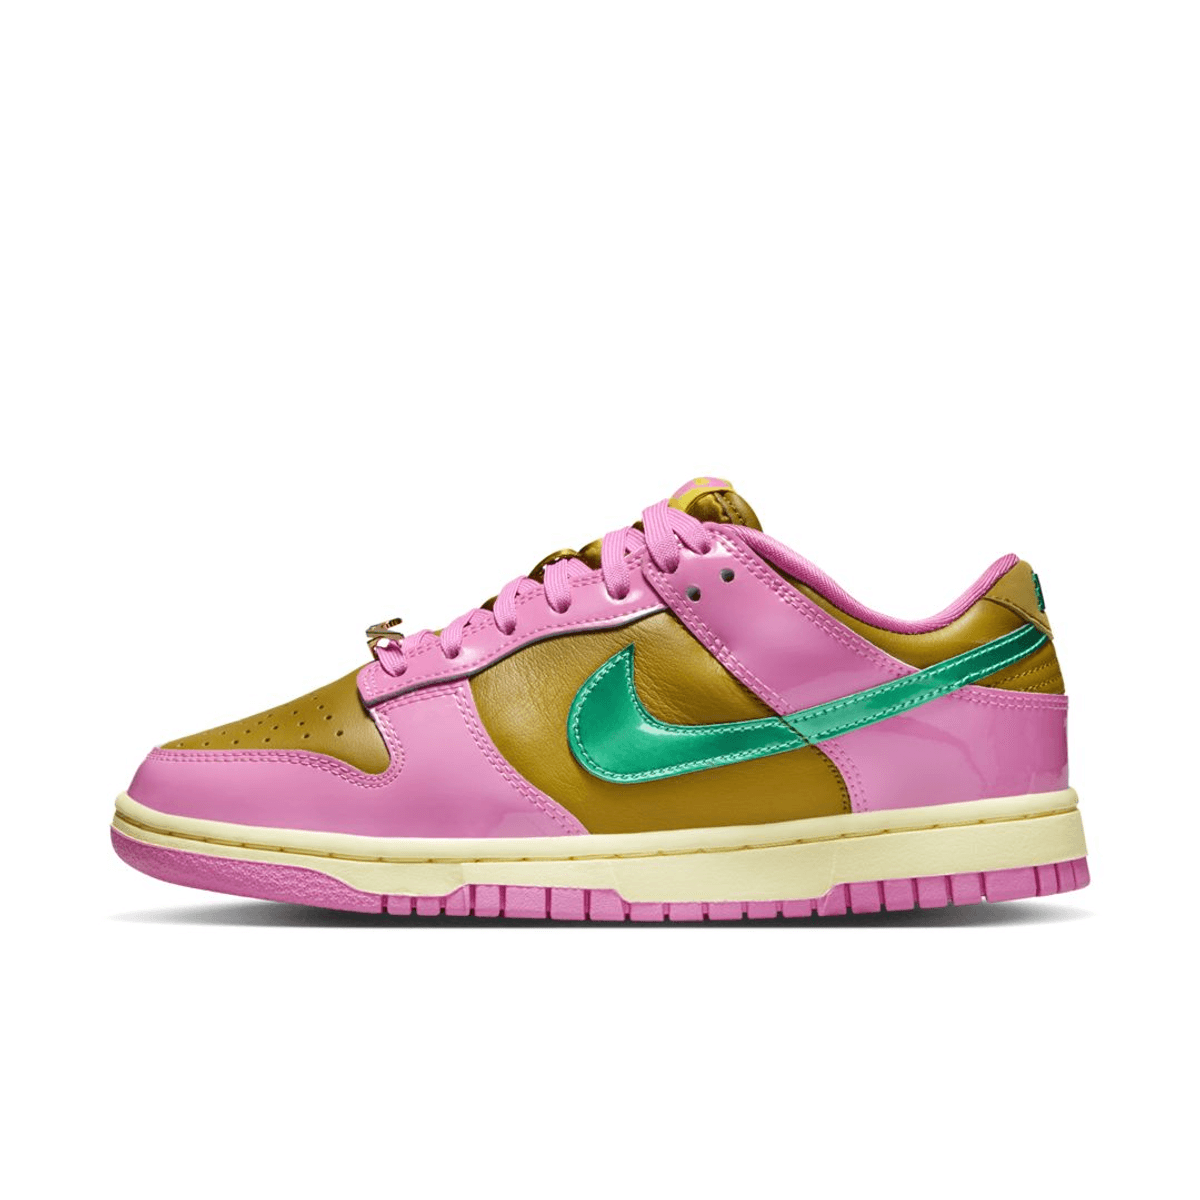 The Parris Goebel x Nike Dunk Low Releases October 24th